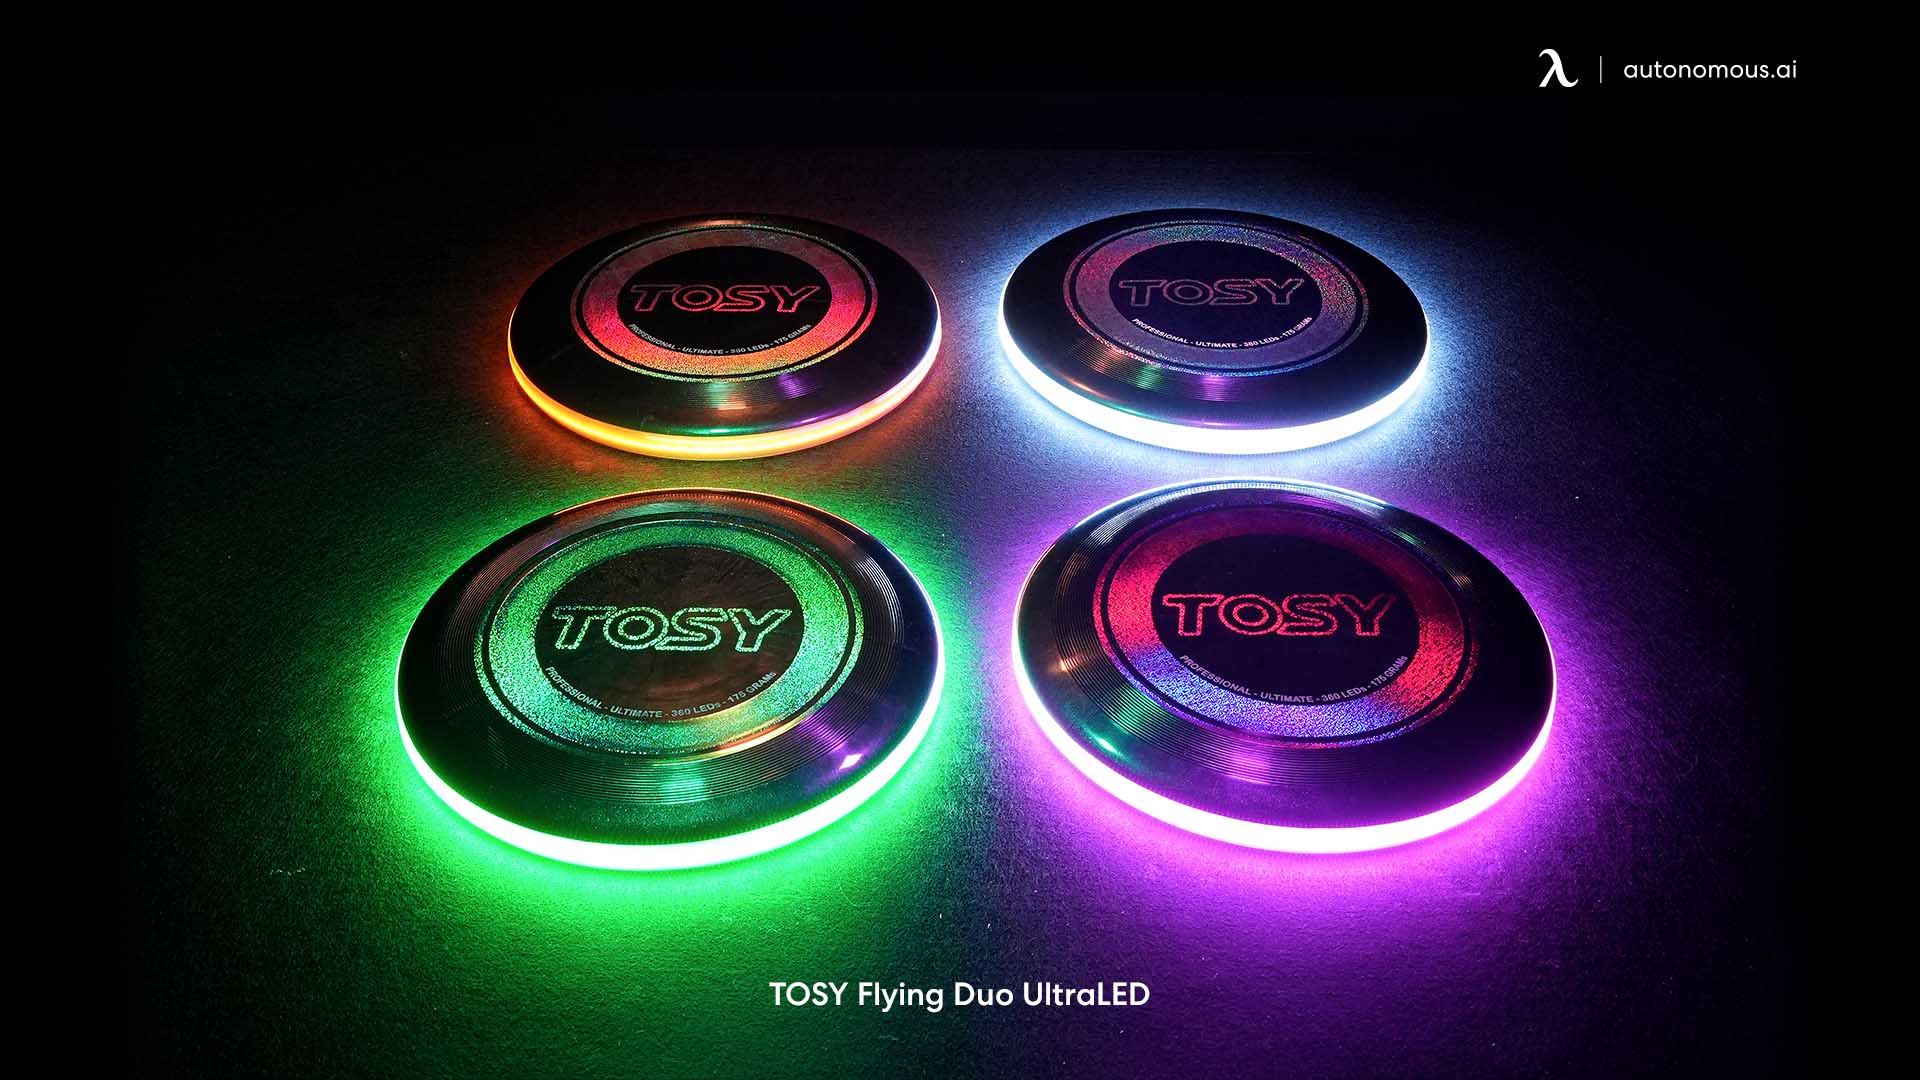 TOSY Flying Duo UltraLED flying disc boomerang